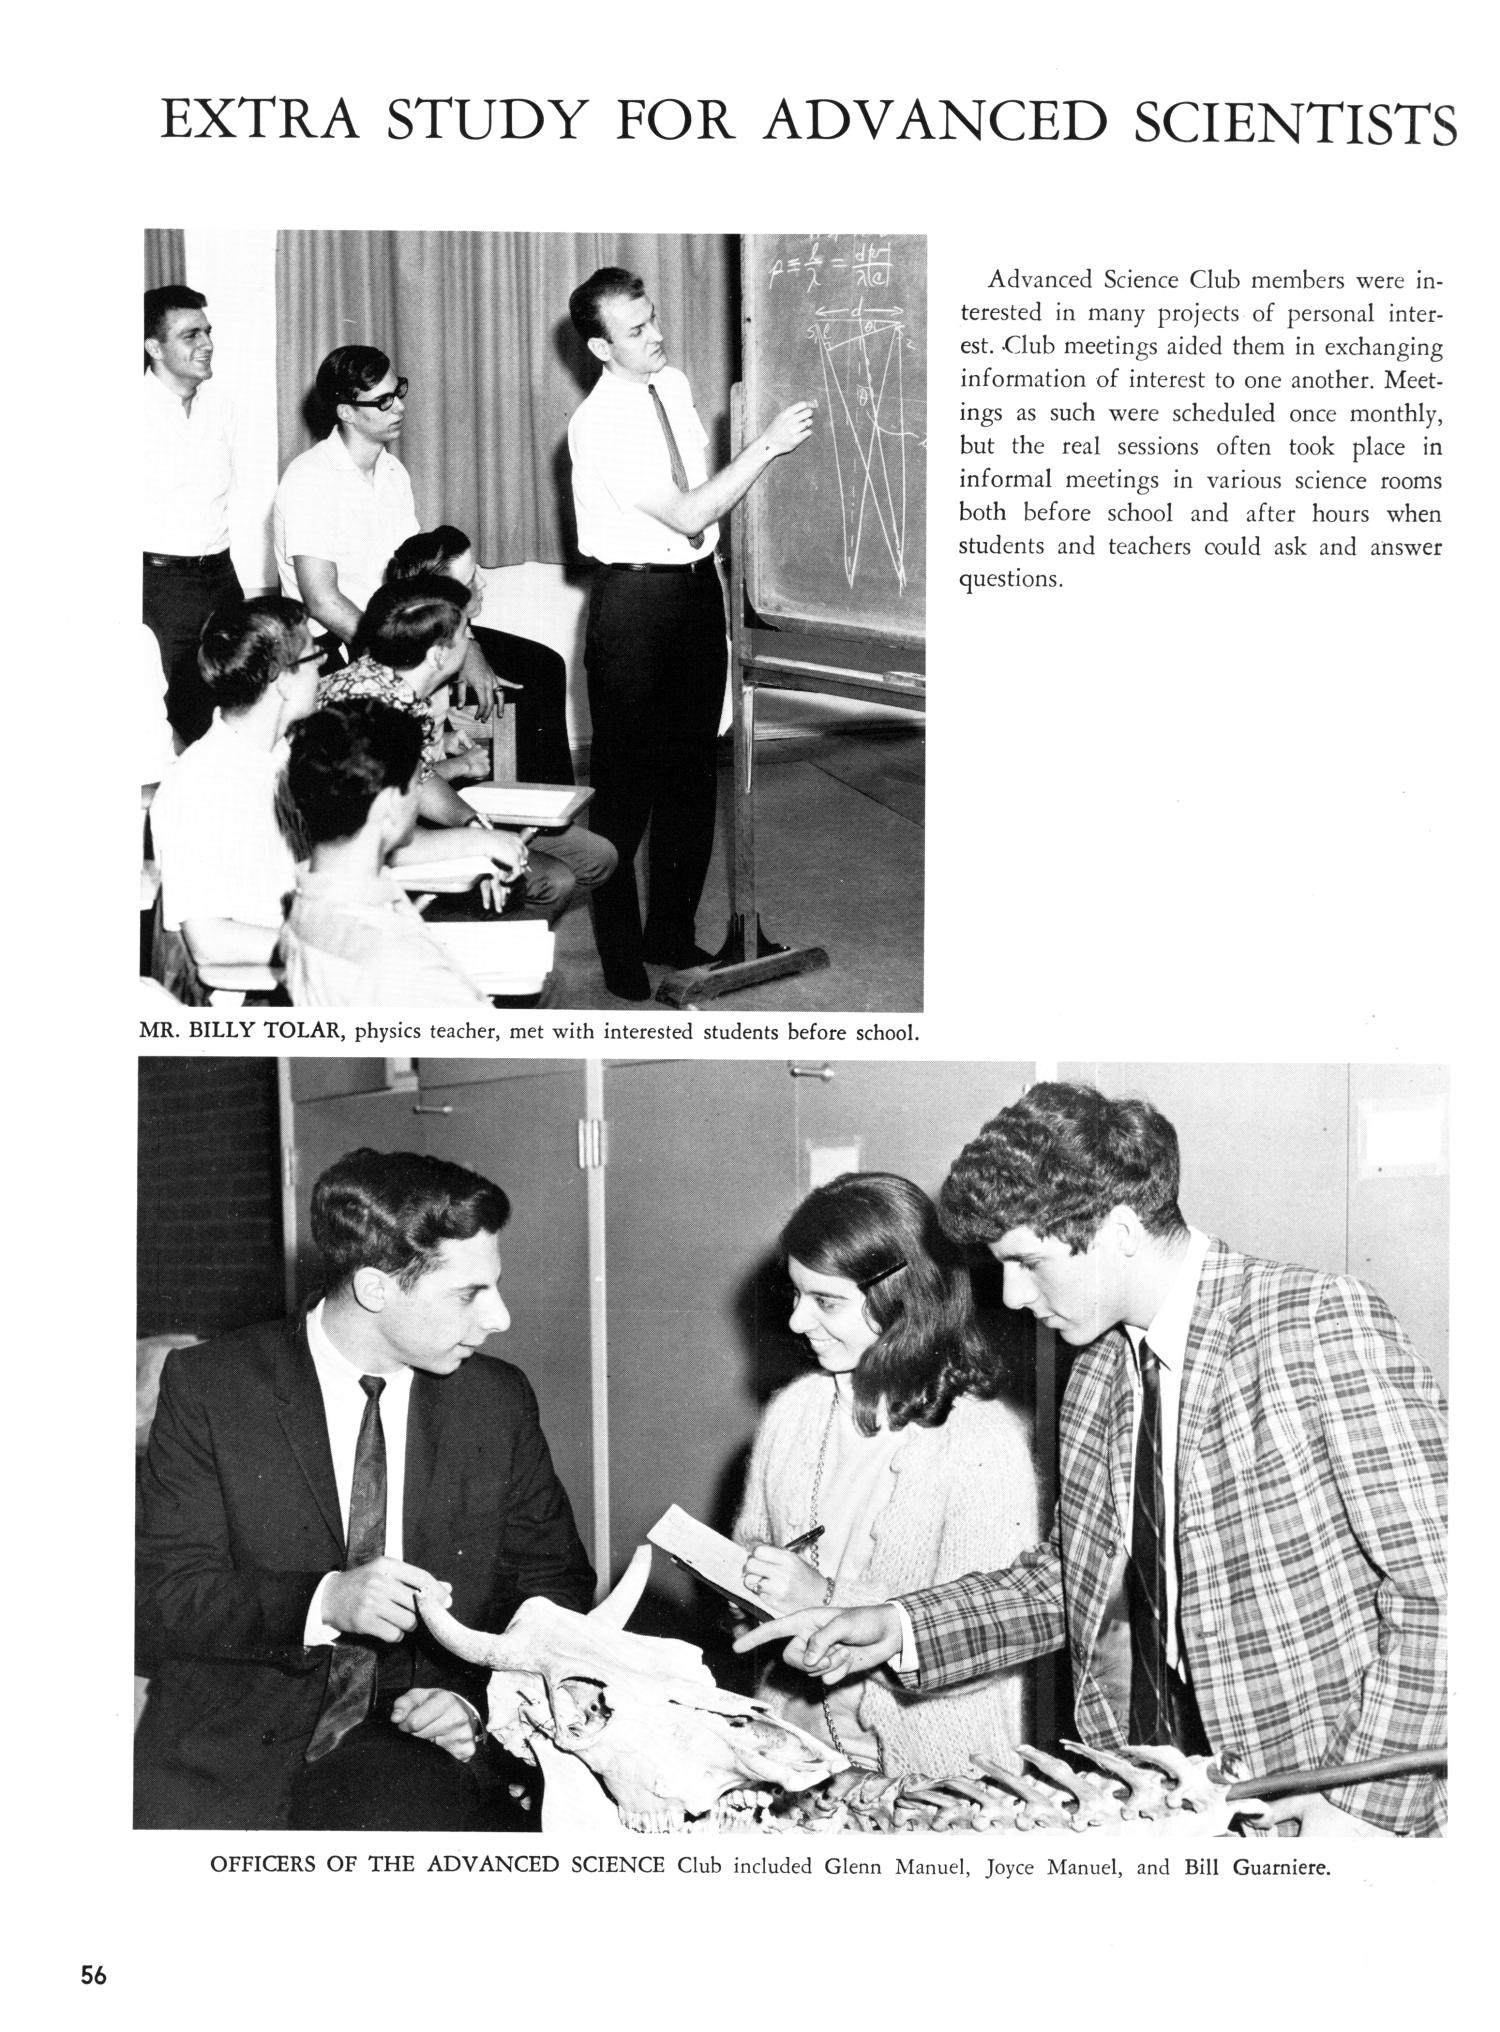 The Yellow Jacket, Yearbook of Thomas Jefferson High School, 1968
                                                
                                                    56
                                                